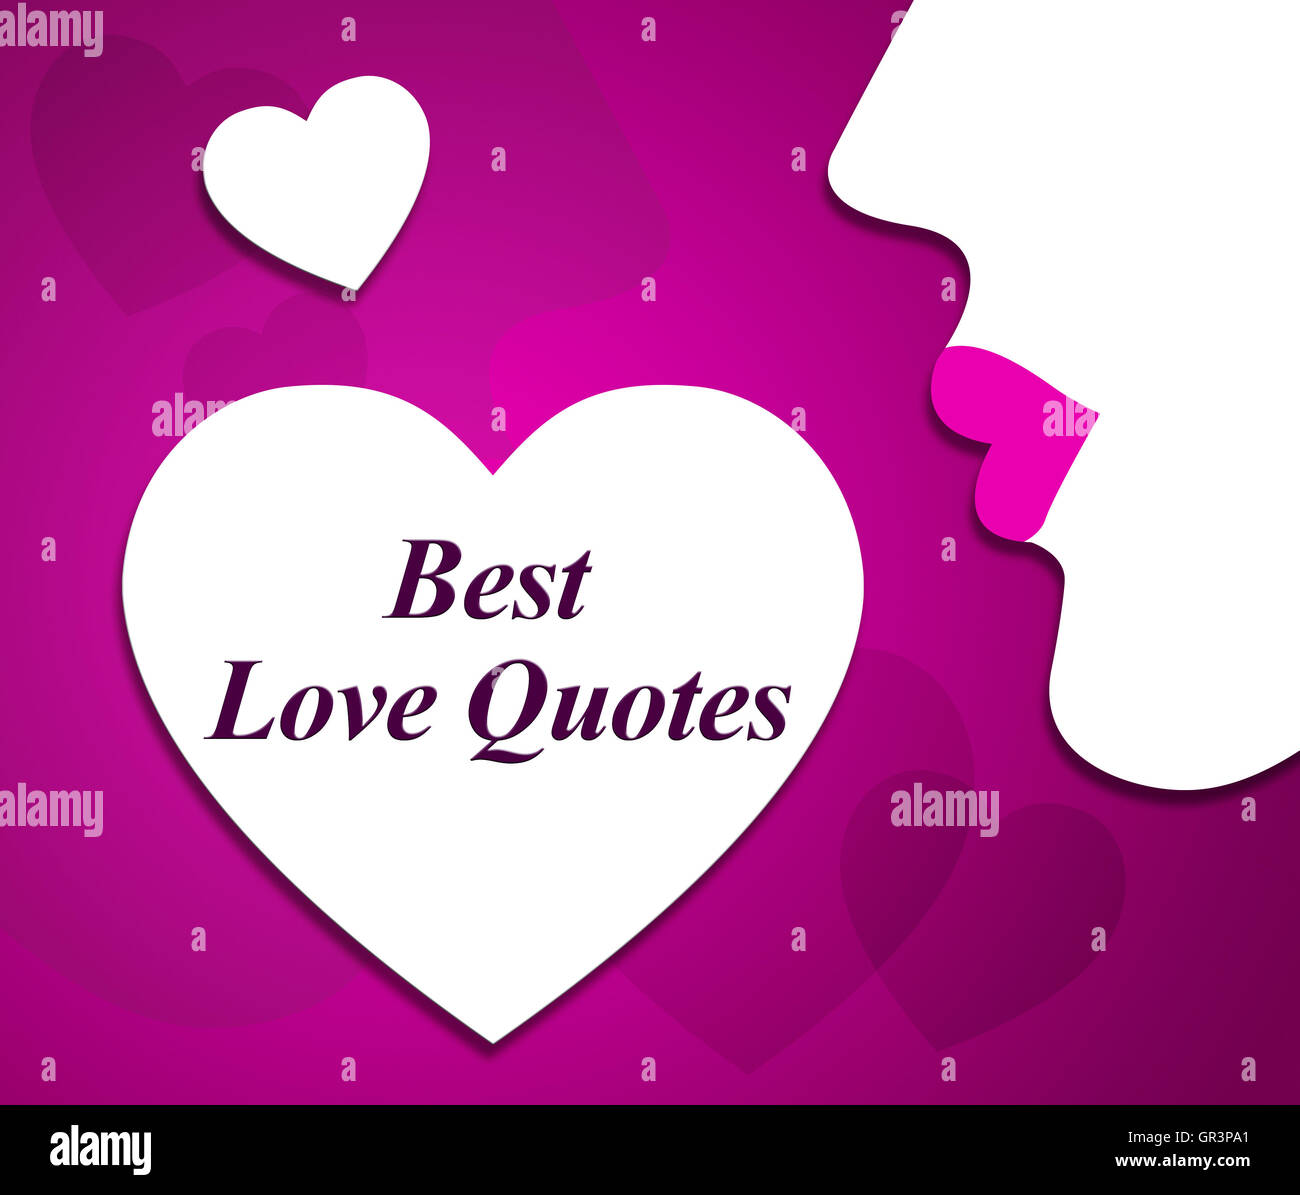 Best Love Quotes Showing Motivation Top And Inspiration Stock Photo